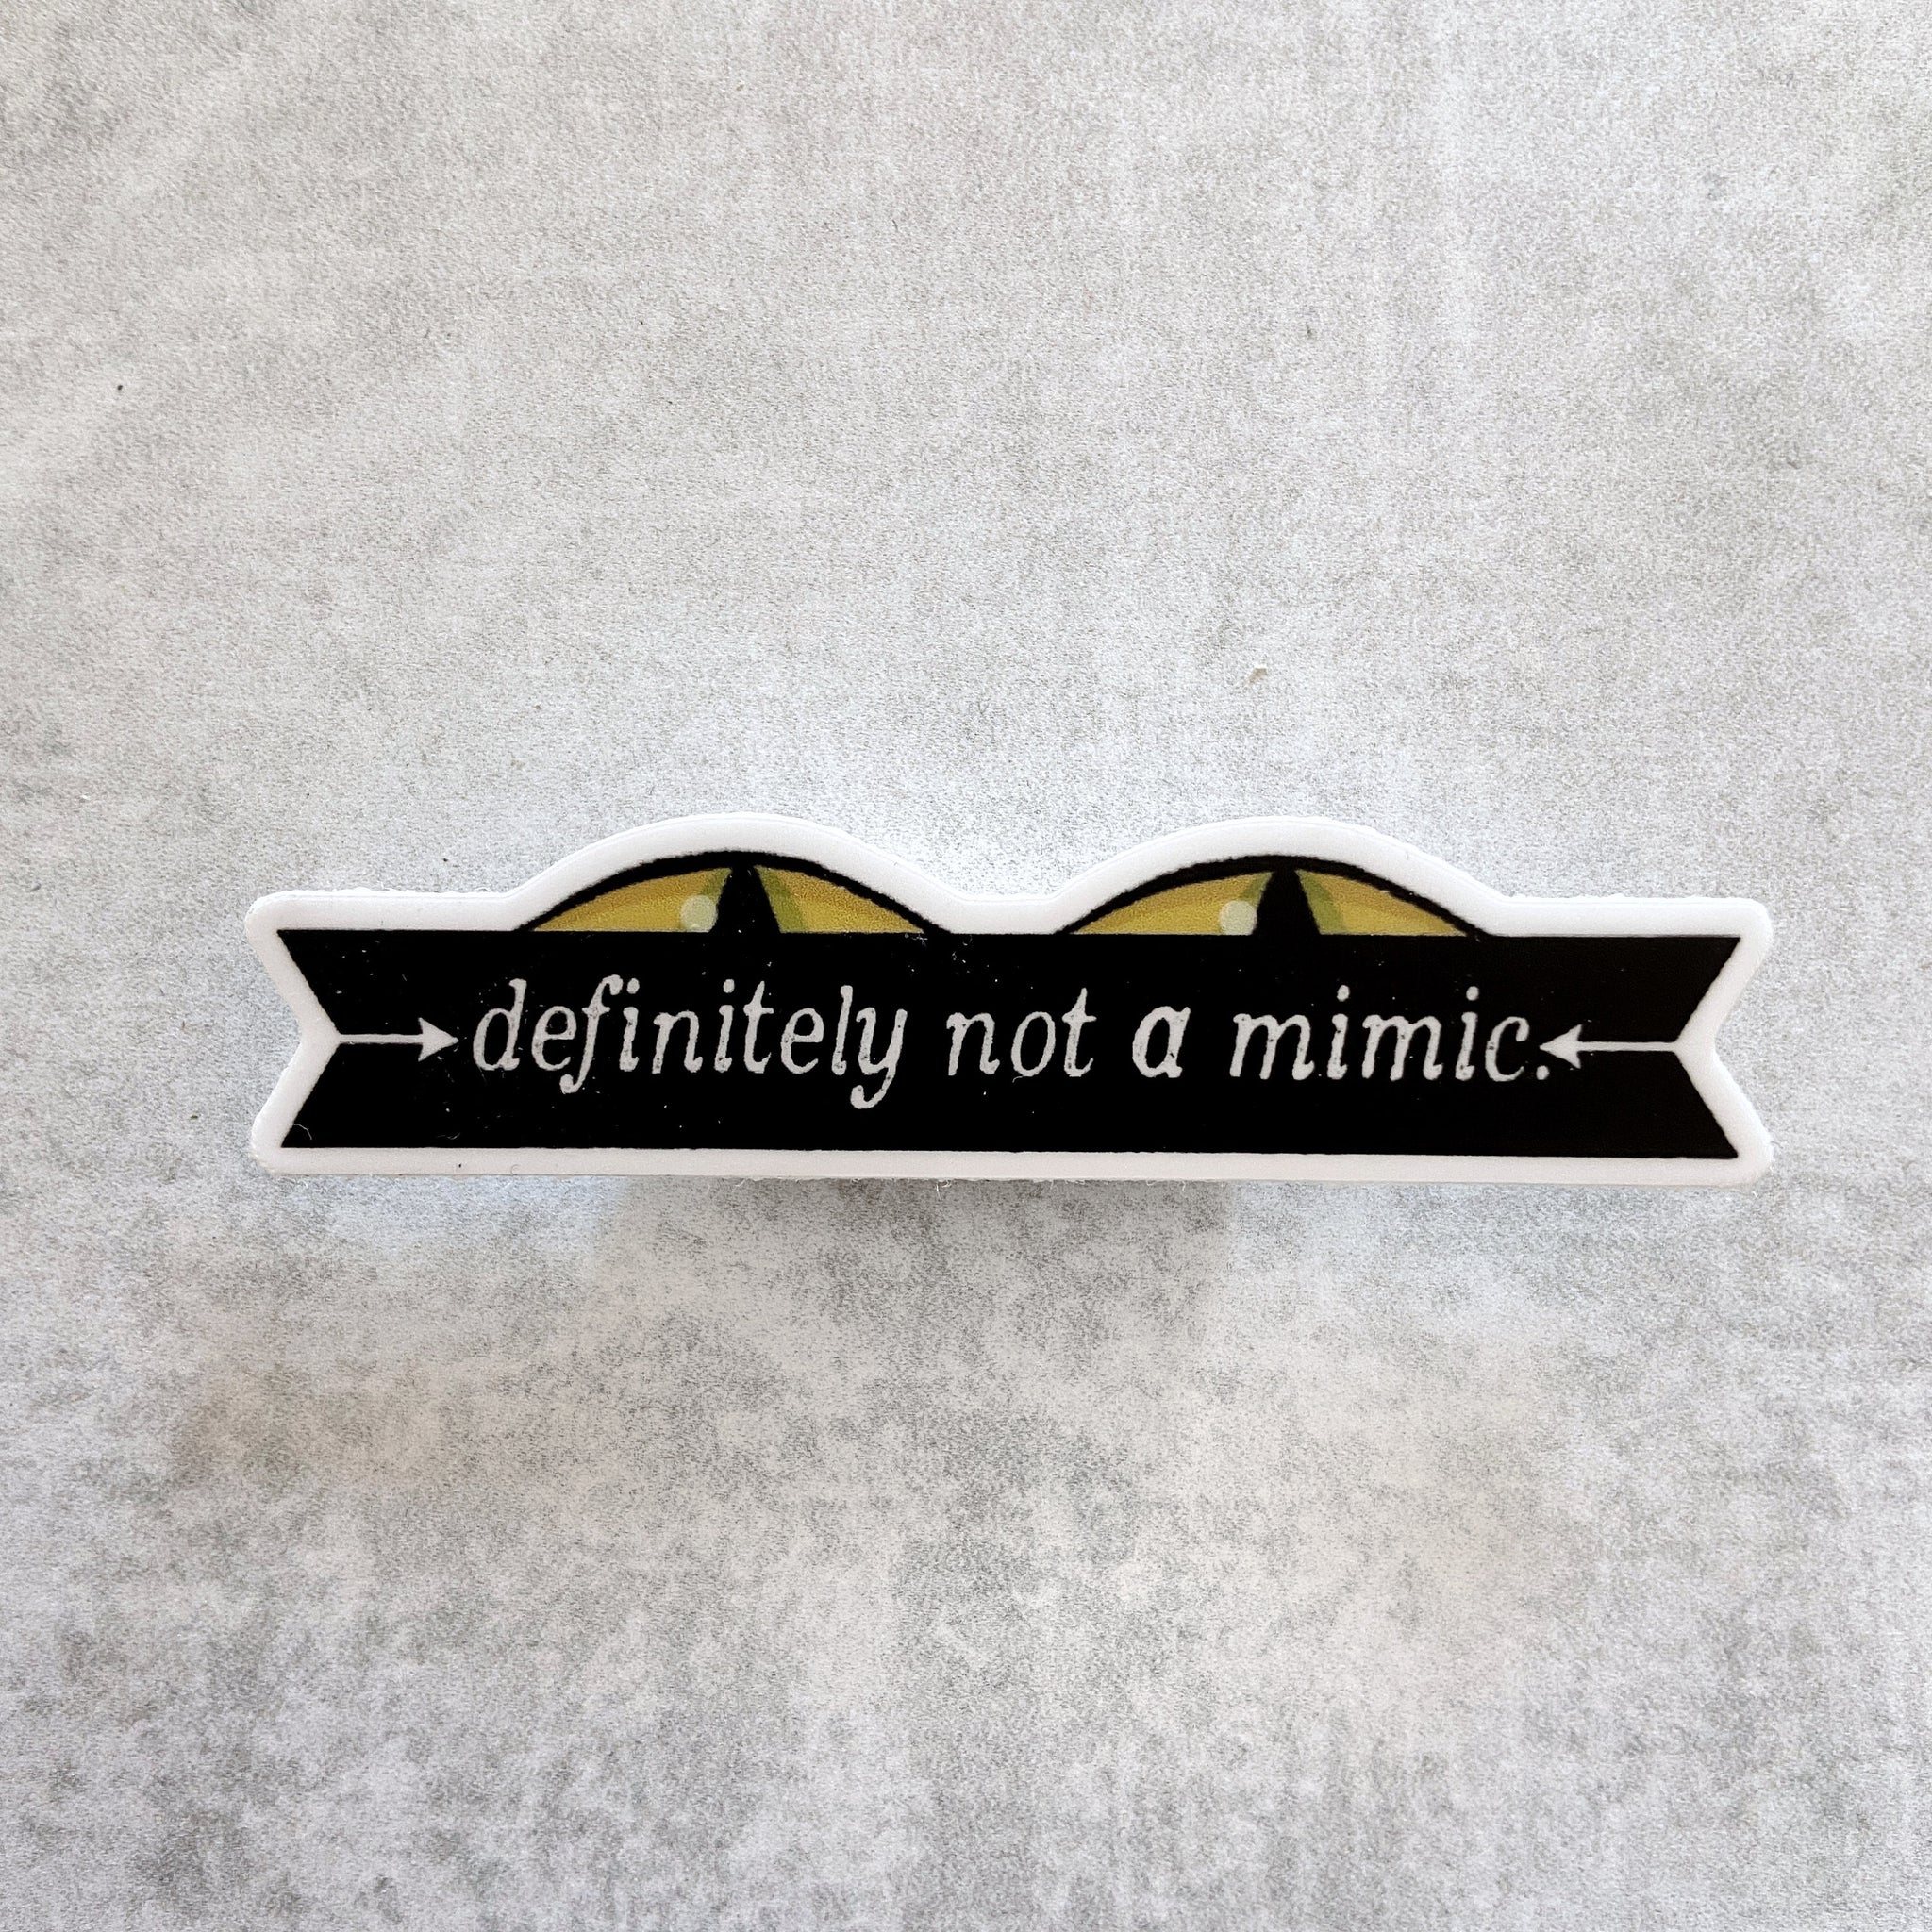 Definitely Not a Mimic - D&D RPG Dungeons and Dragons - vinyl sticker for writers, writing, authors - waterproof, UV-proof